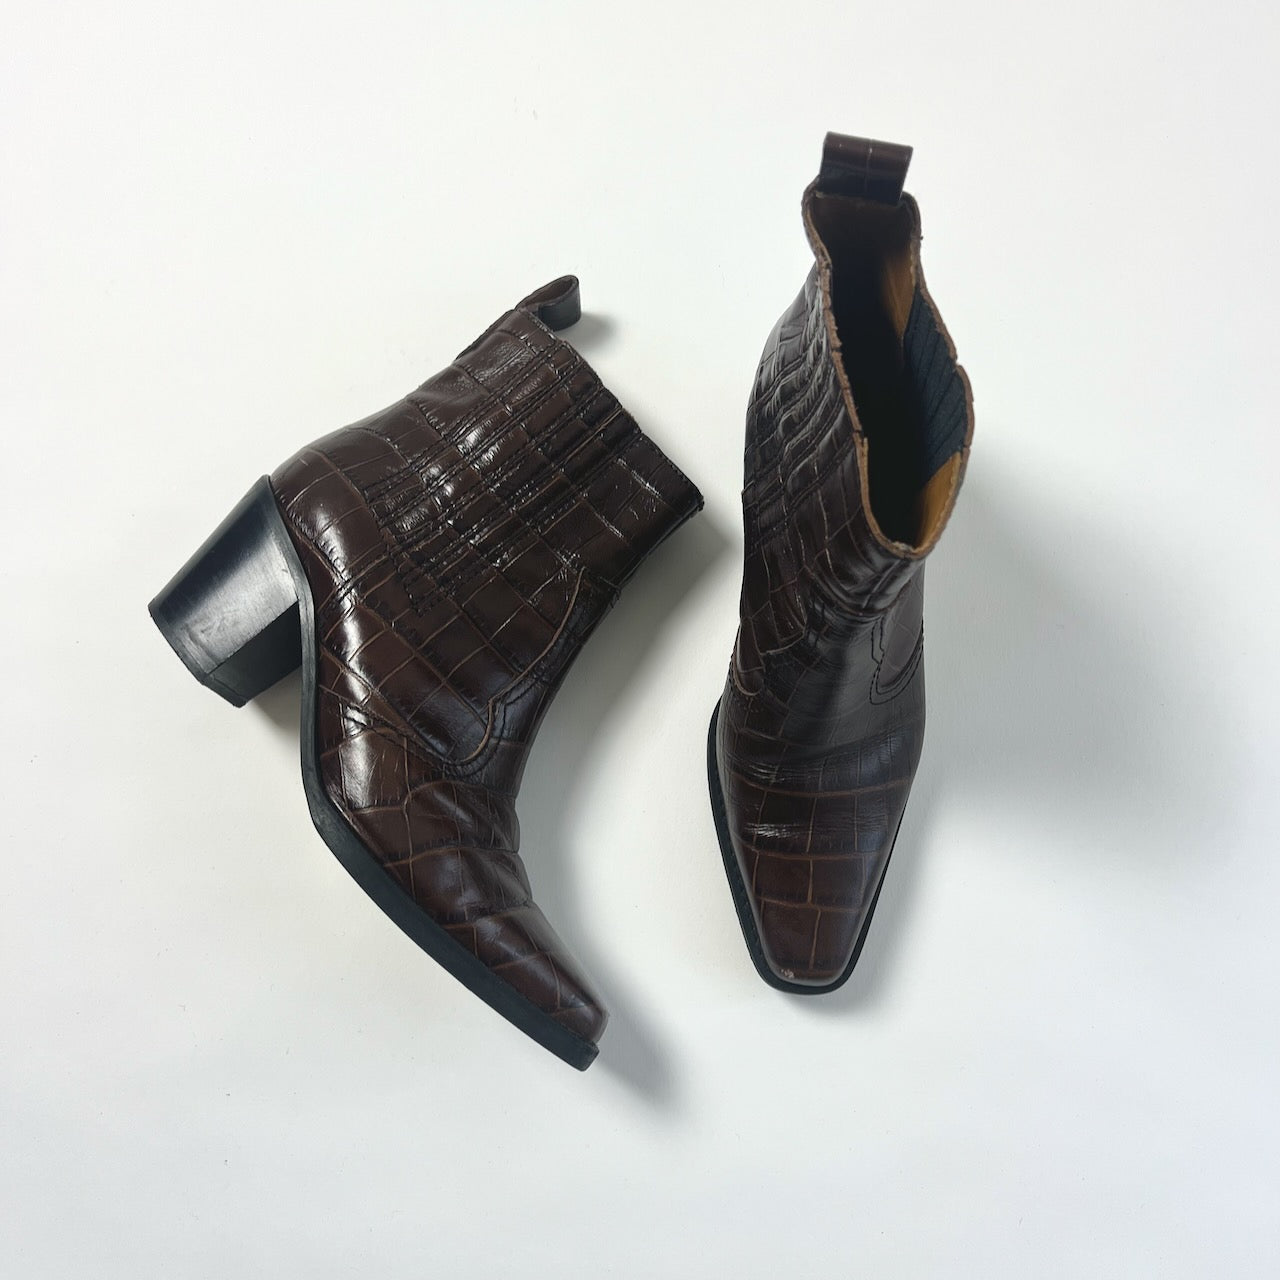 Ganni croc-embossed brown leather western ankle boots